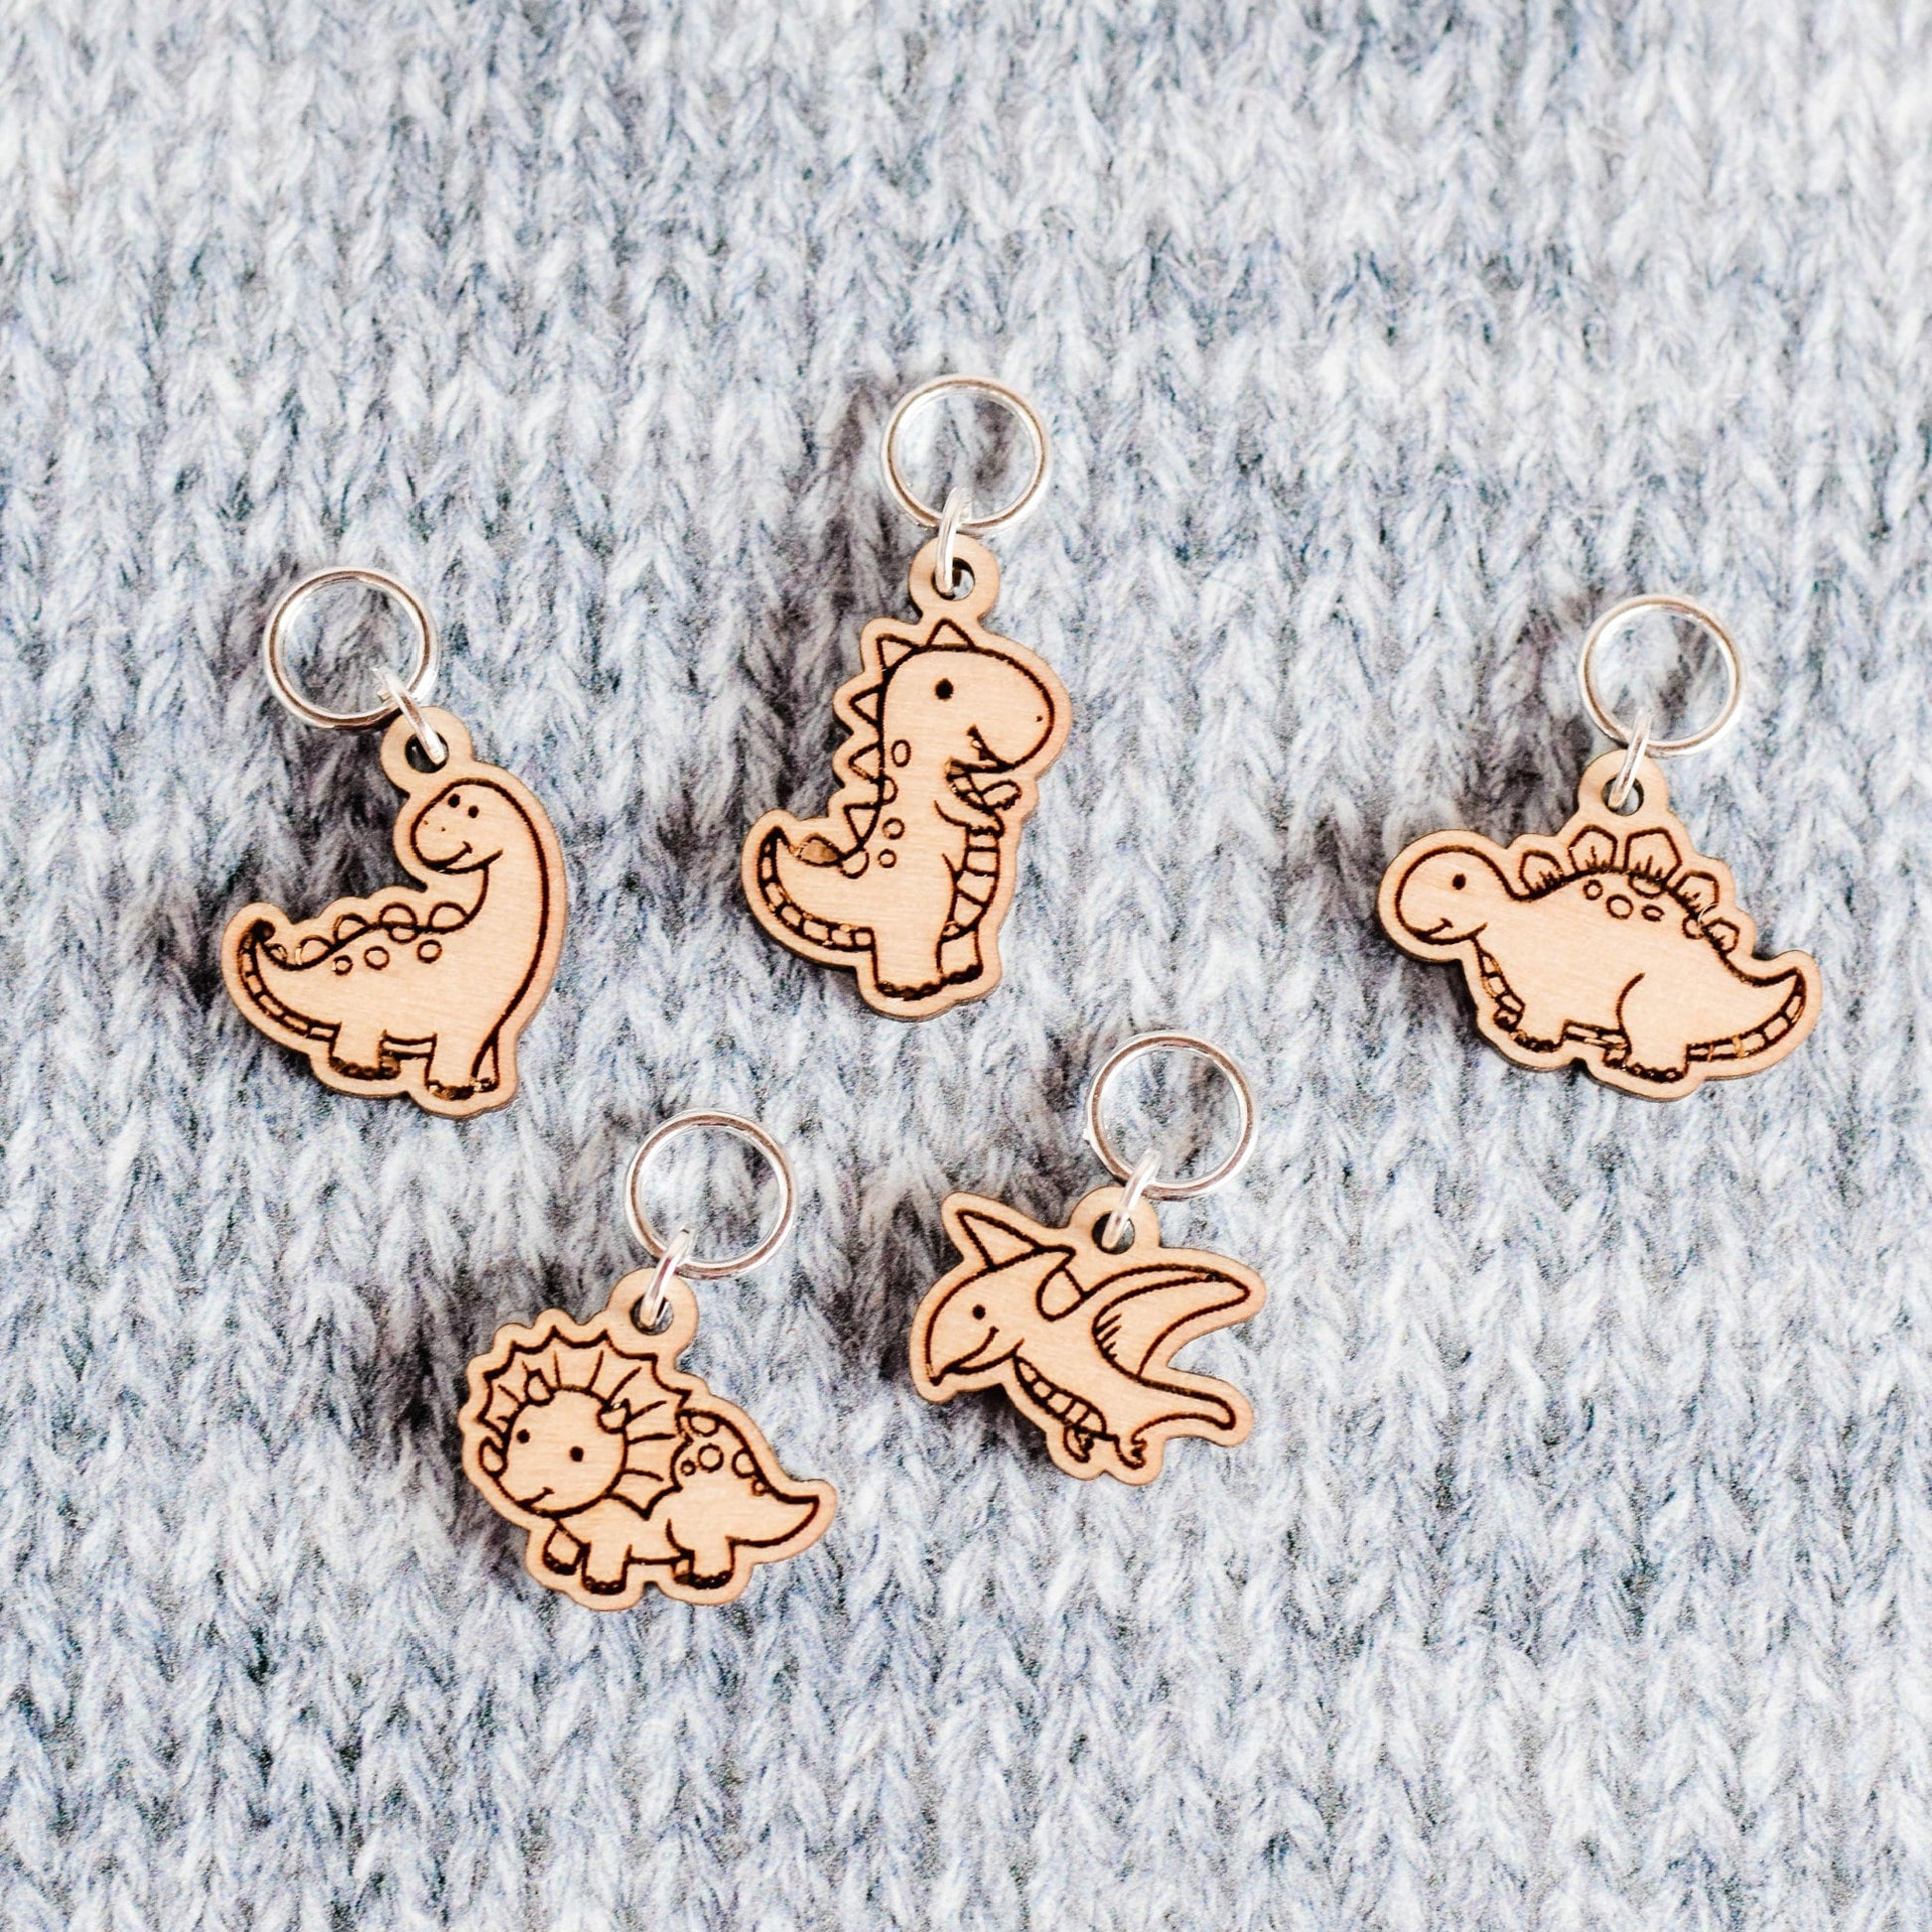 Set of 5 Stitch Markers - Dinosaurs - Laser Engraved Wood Stitch Markers, Dinosaur Stitch Markers, Knitting Markers